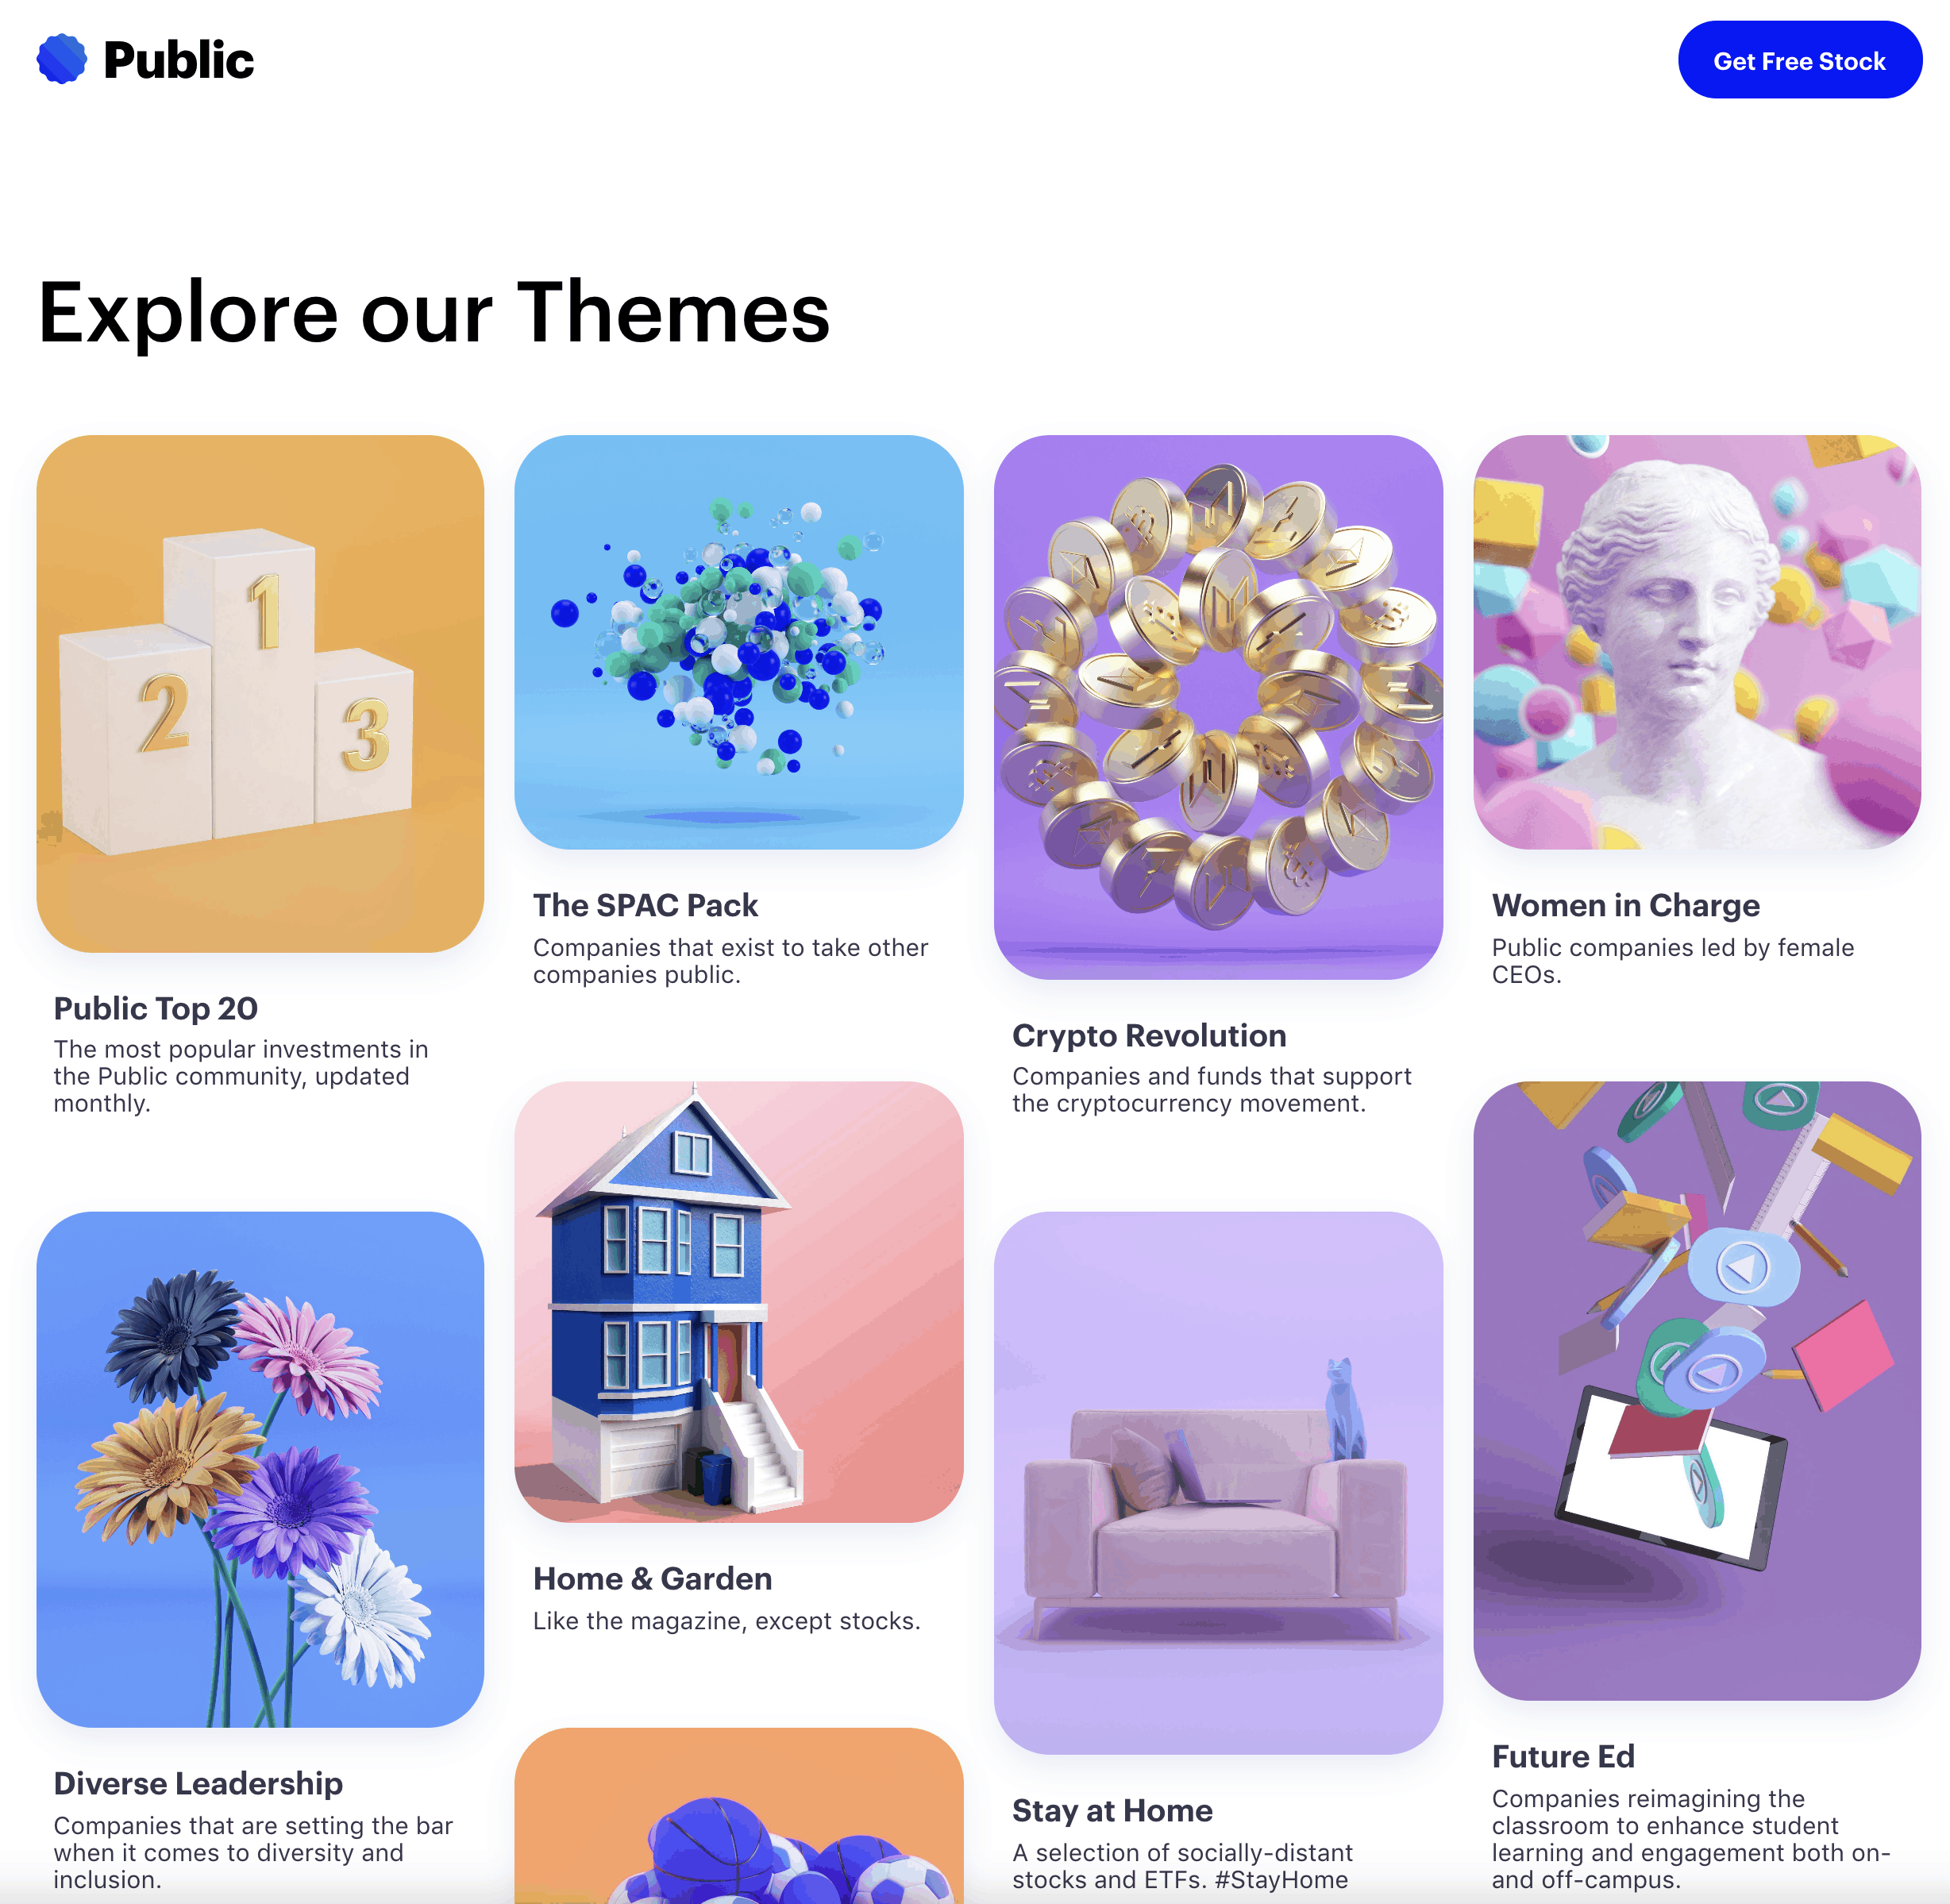 Examples of Public's themes to follow.